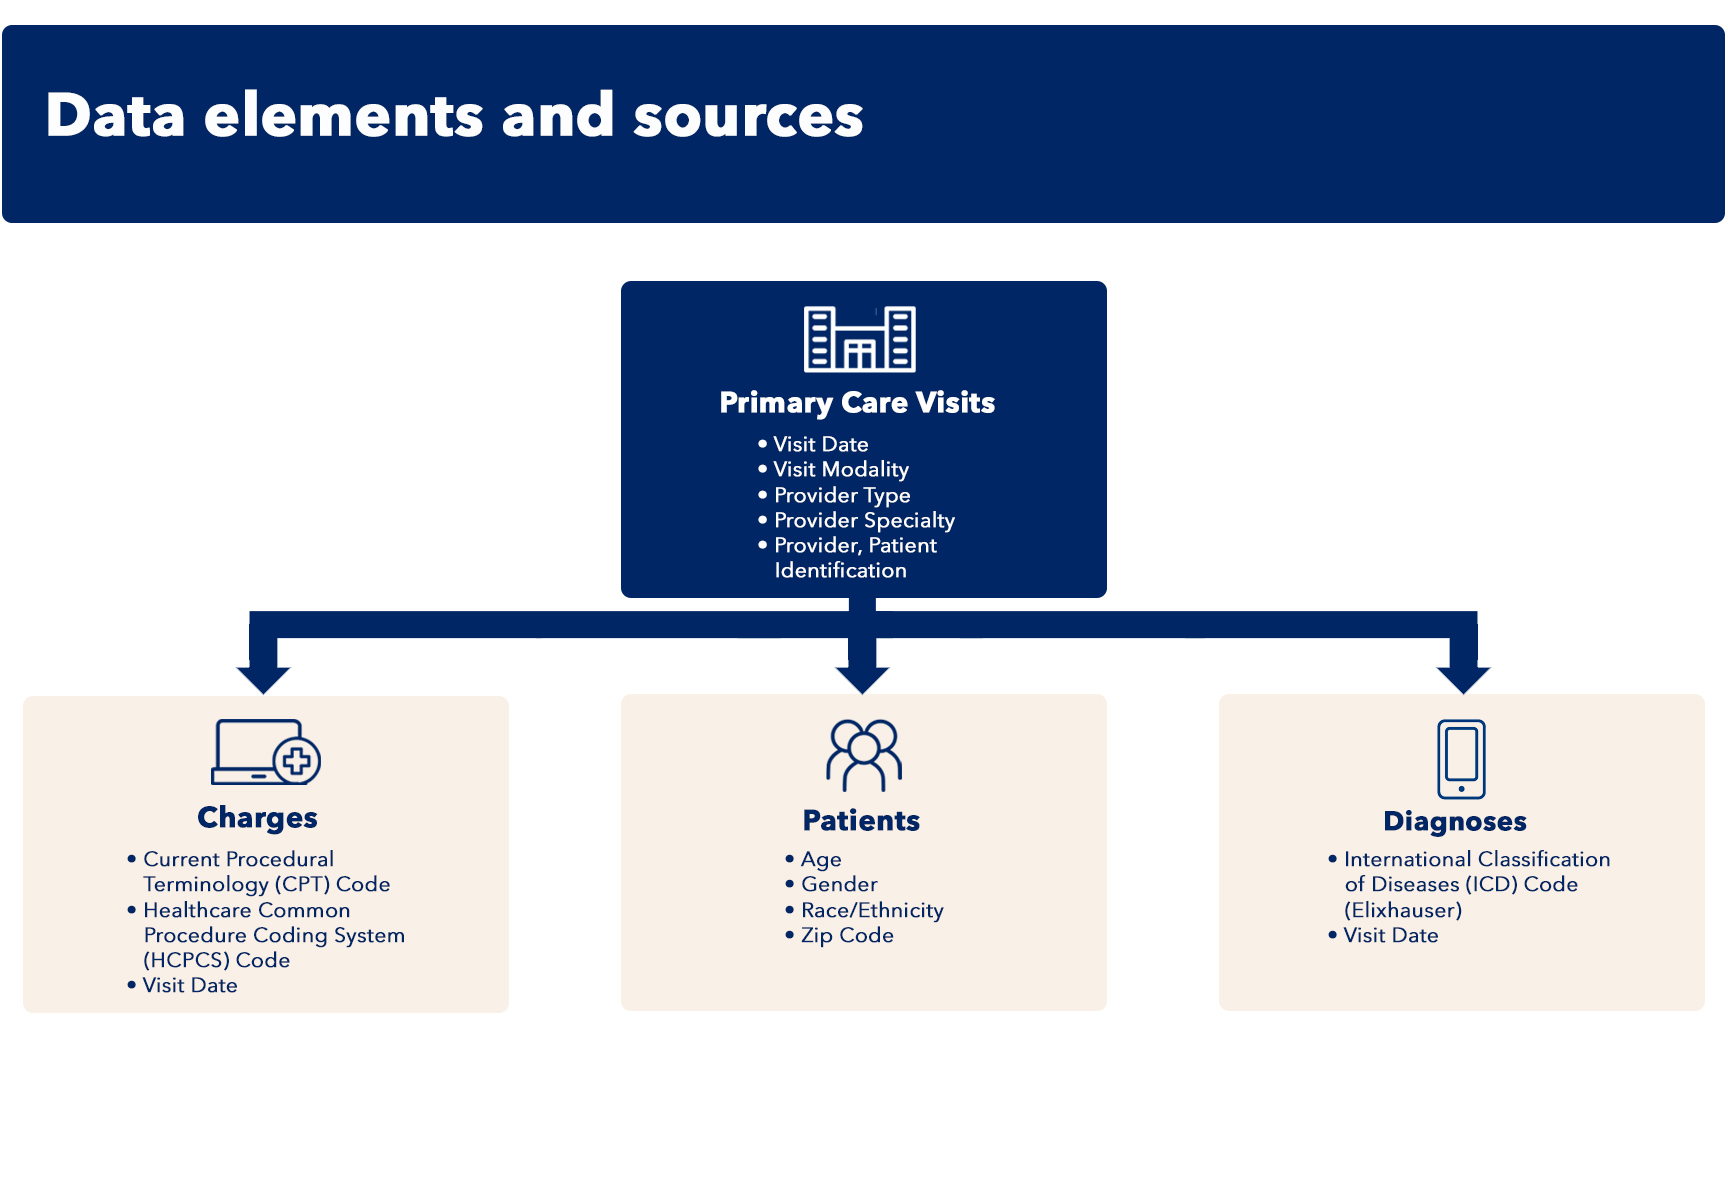 Infographic title: Data elements and sources; Data sources: Primary Care Visits, Charges, Patients, Diagnoses.